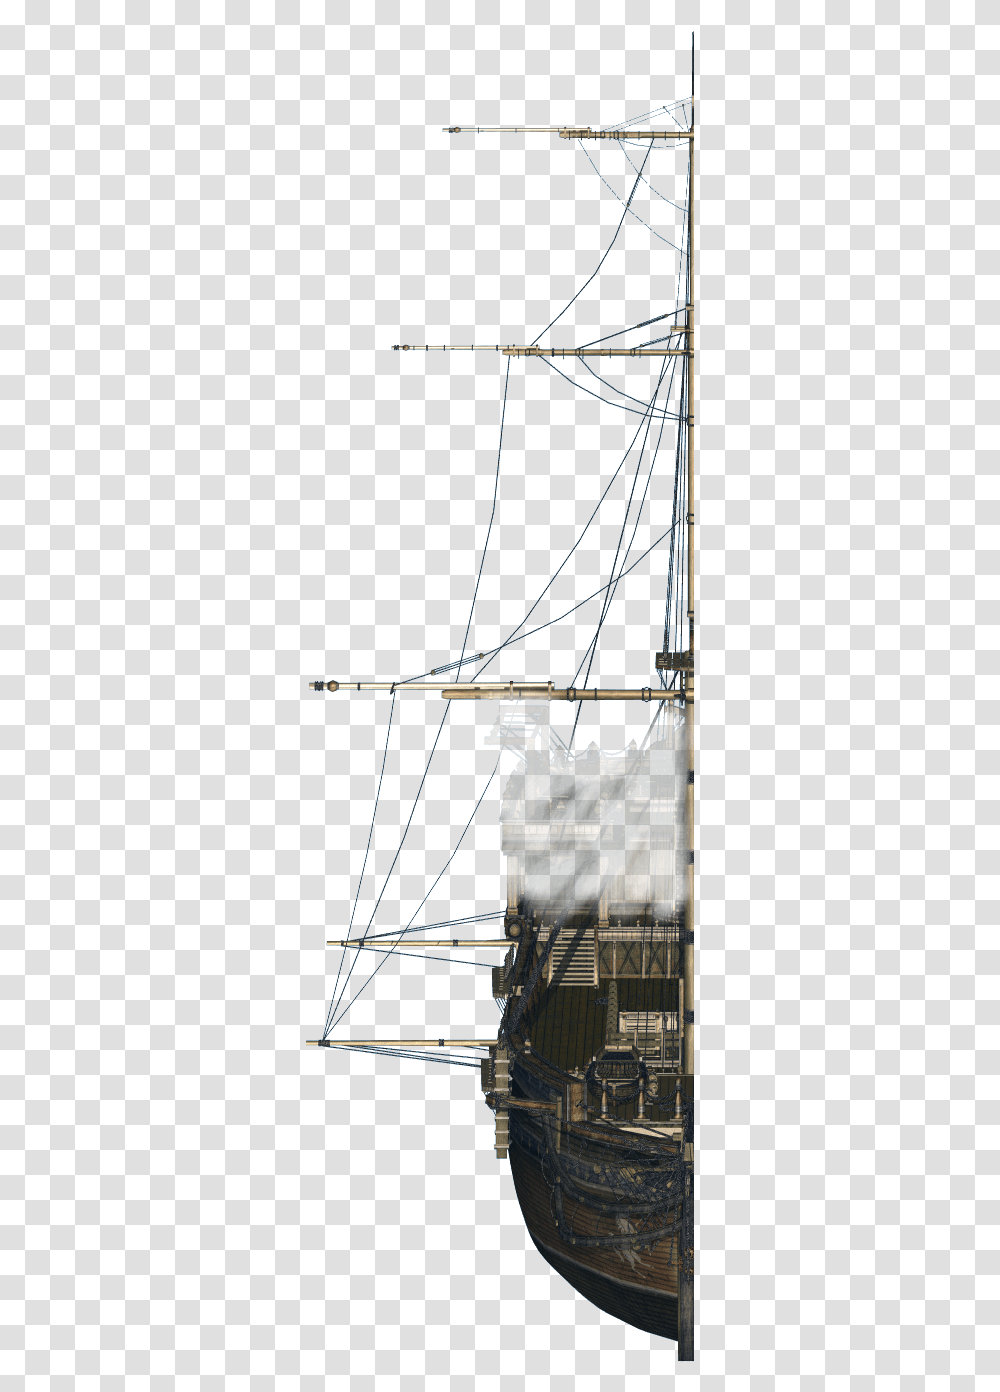 Dundjinni Sinking Ship, Utility Pole, Cable, Boat, Vehicle Transparent Png